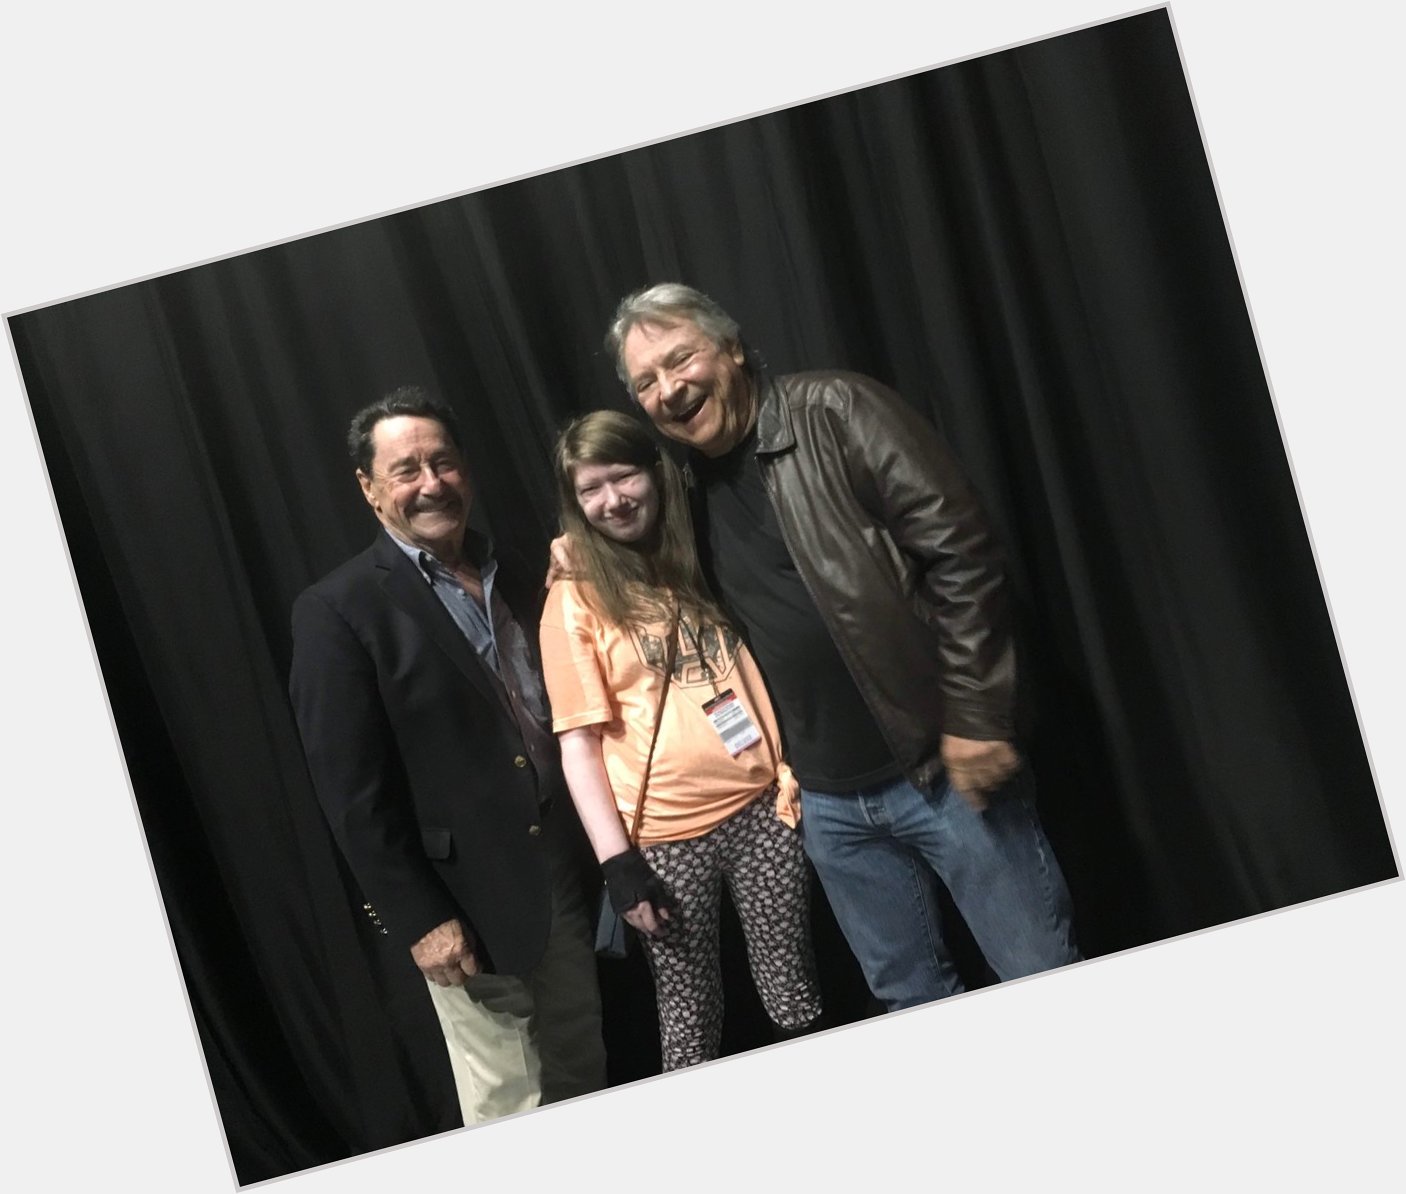 Happy birthday to Peter Cullen!!!! 

I will forever cherish this moment. :\3 